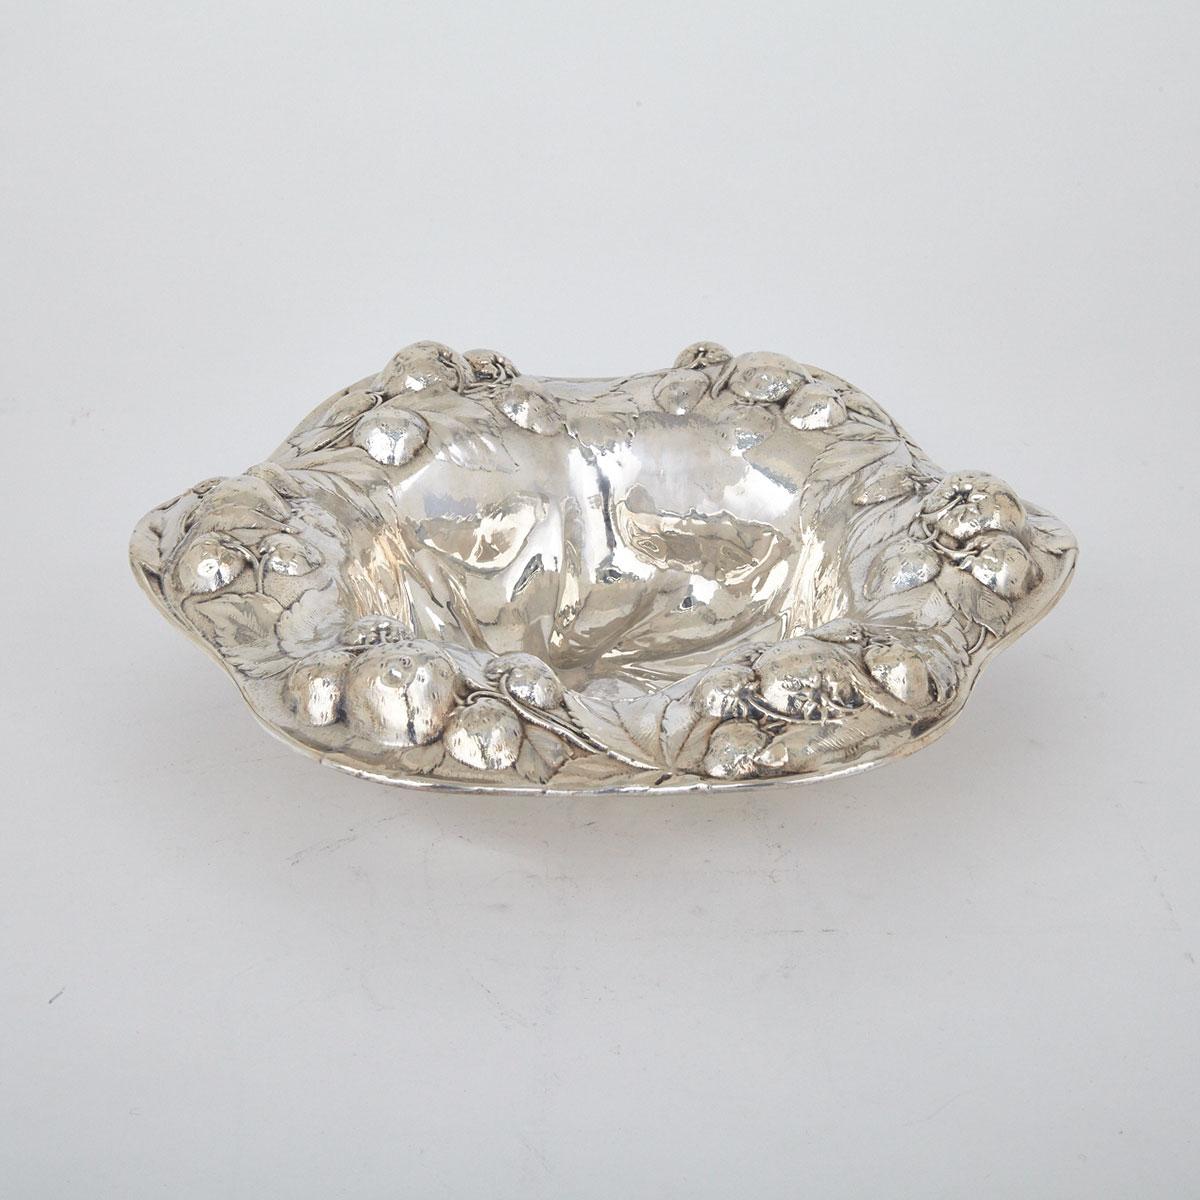 American Silver Berry Bowl, Mauser Mfg. Co., New York, NY, c.1900